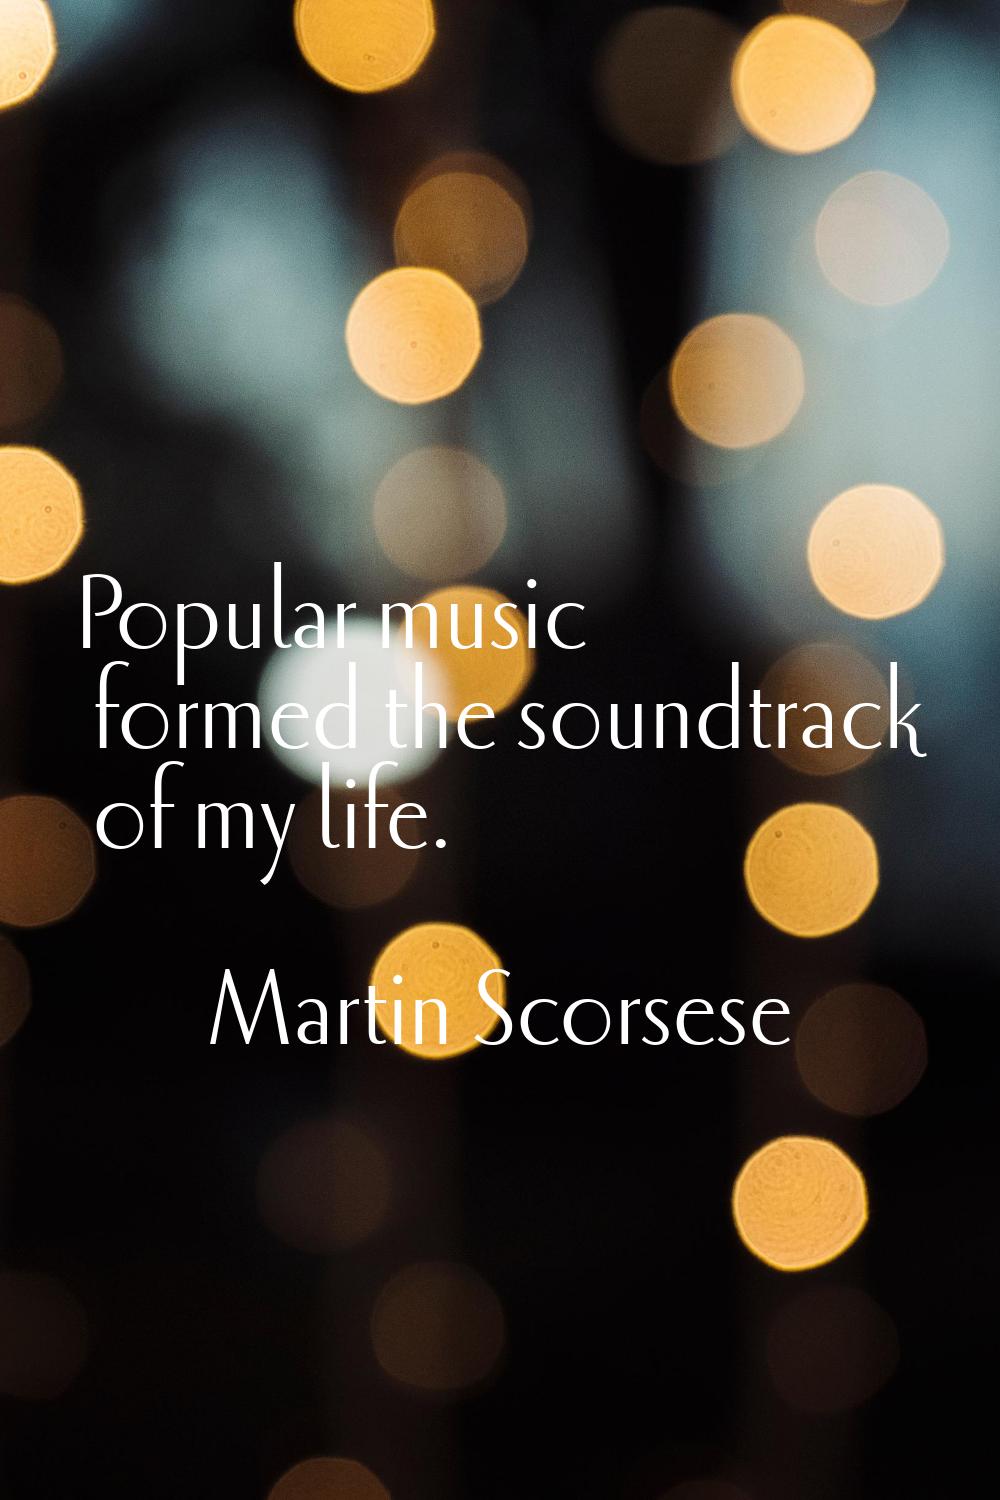 Popular music formed the soundtrack of my life.